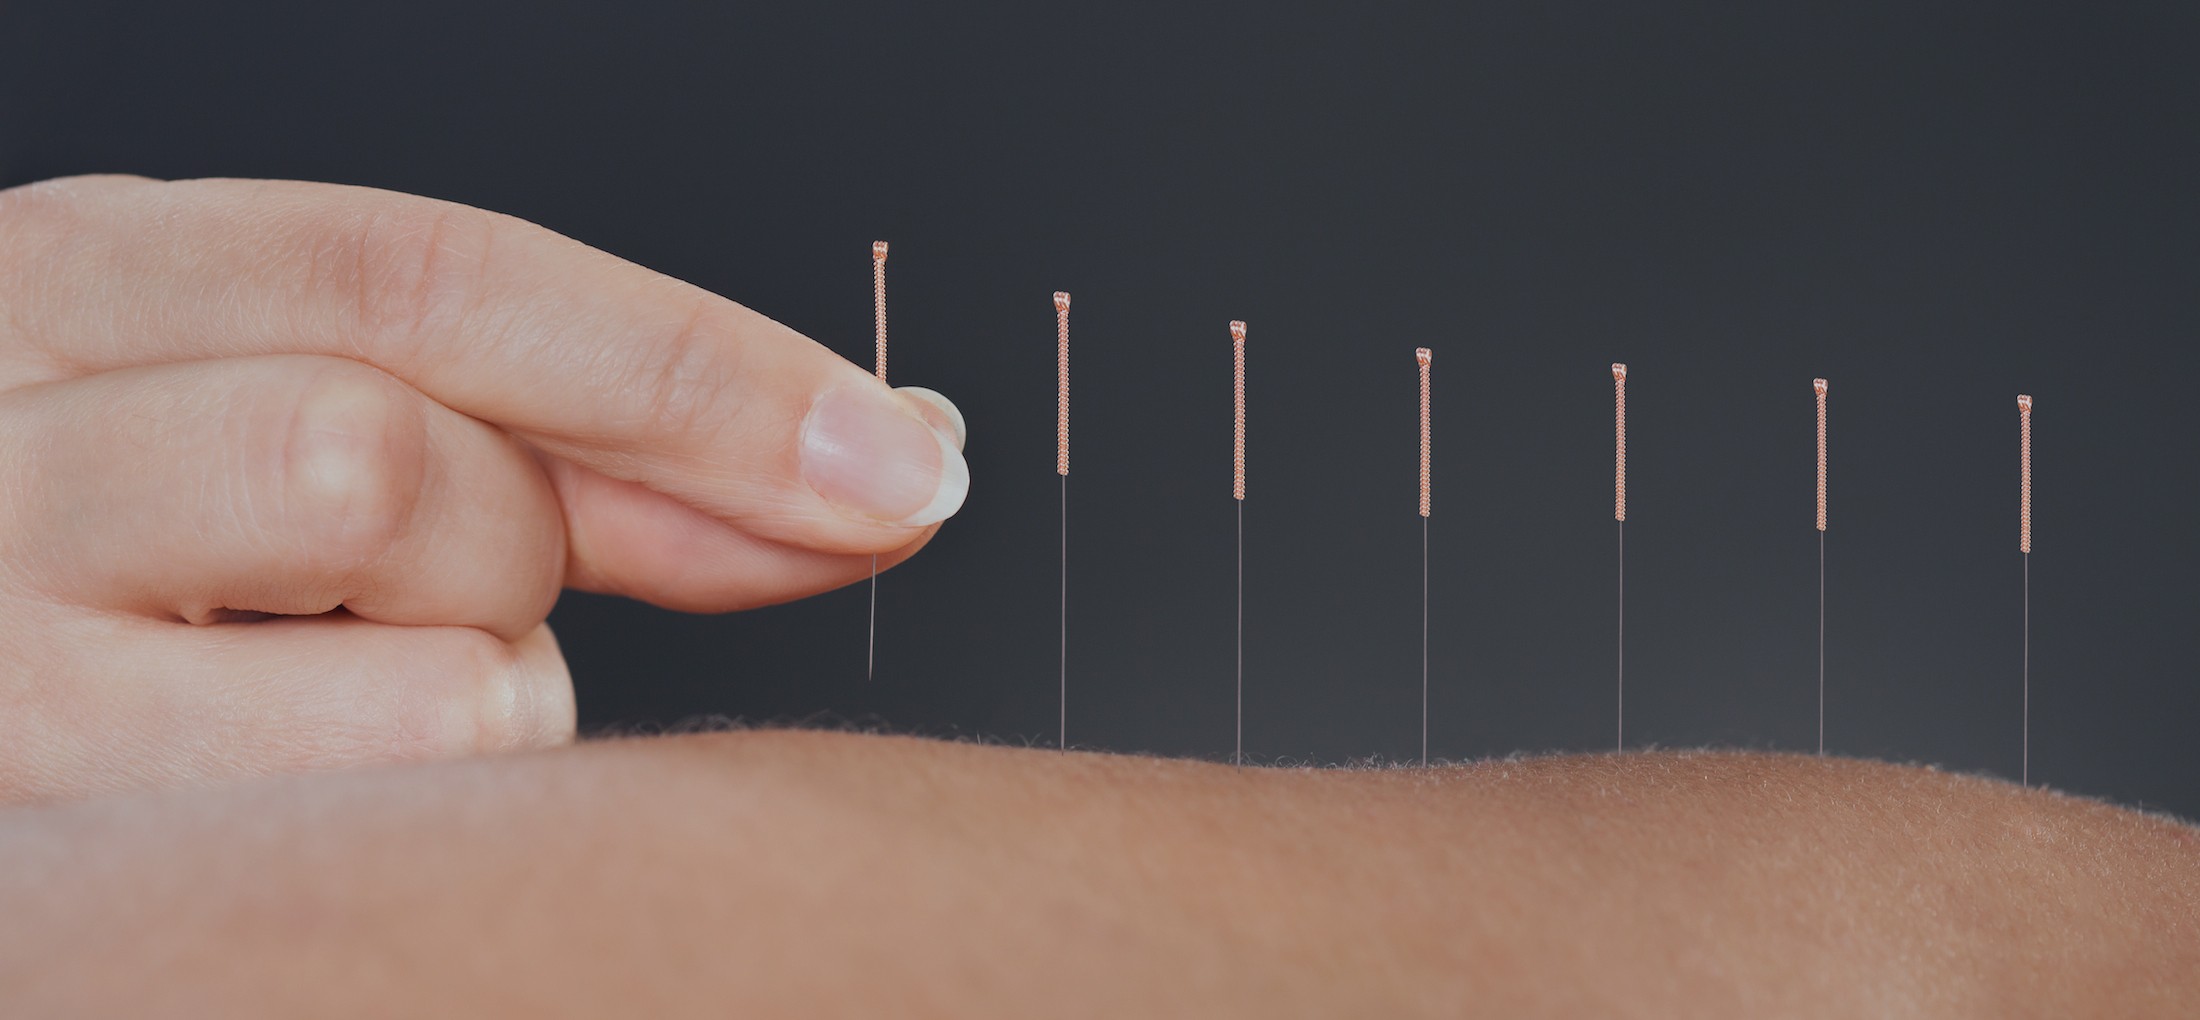 ACUPUNCTURE / TRADITIONAL CHINESE MEDICINE - Balance Complimentary Medicine